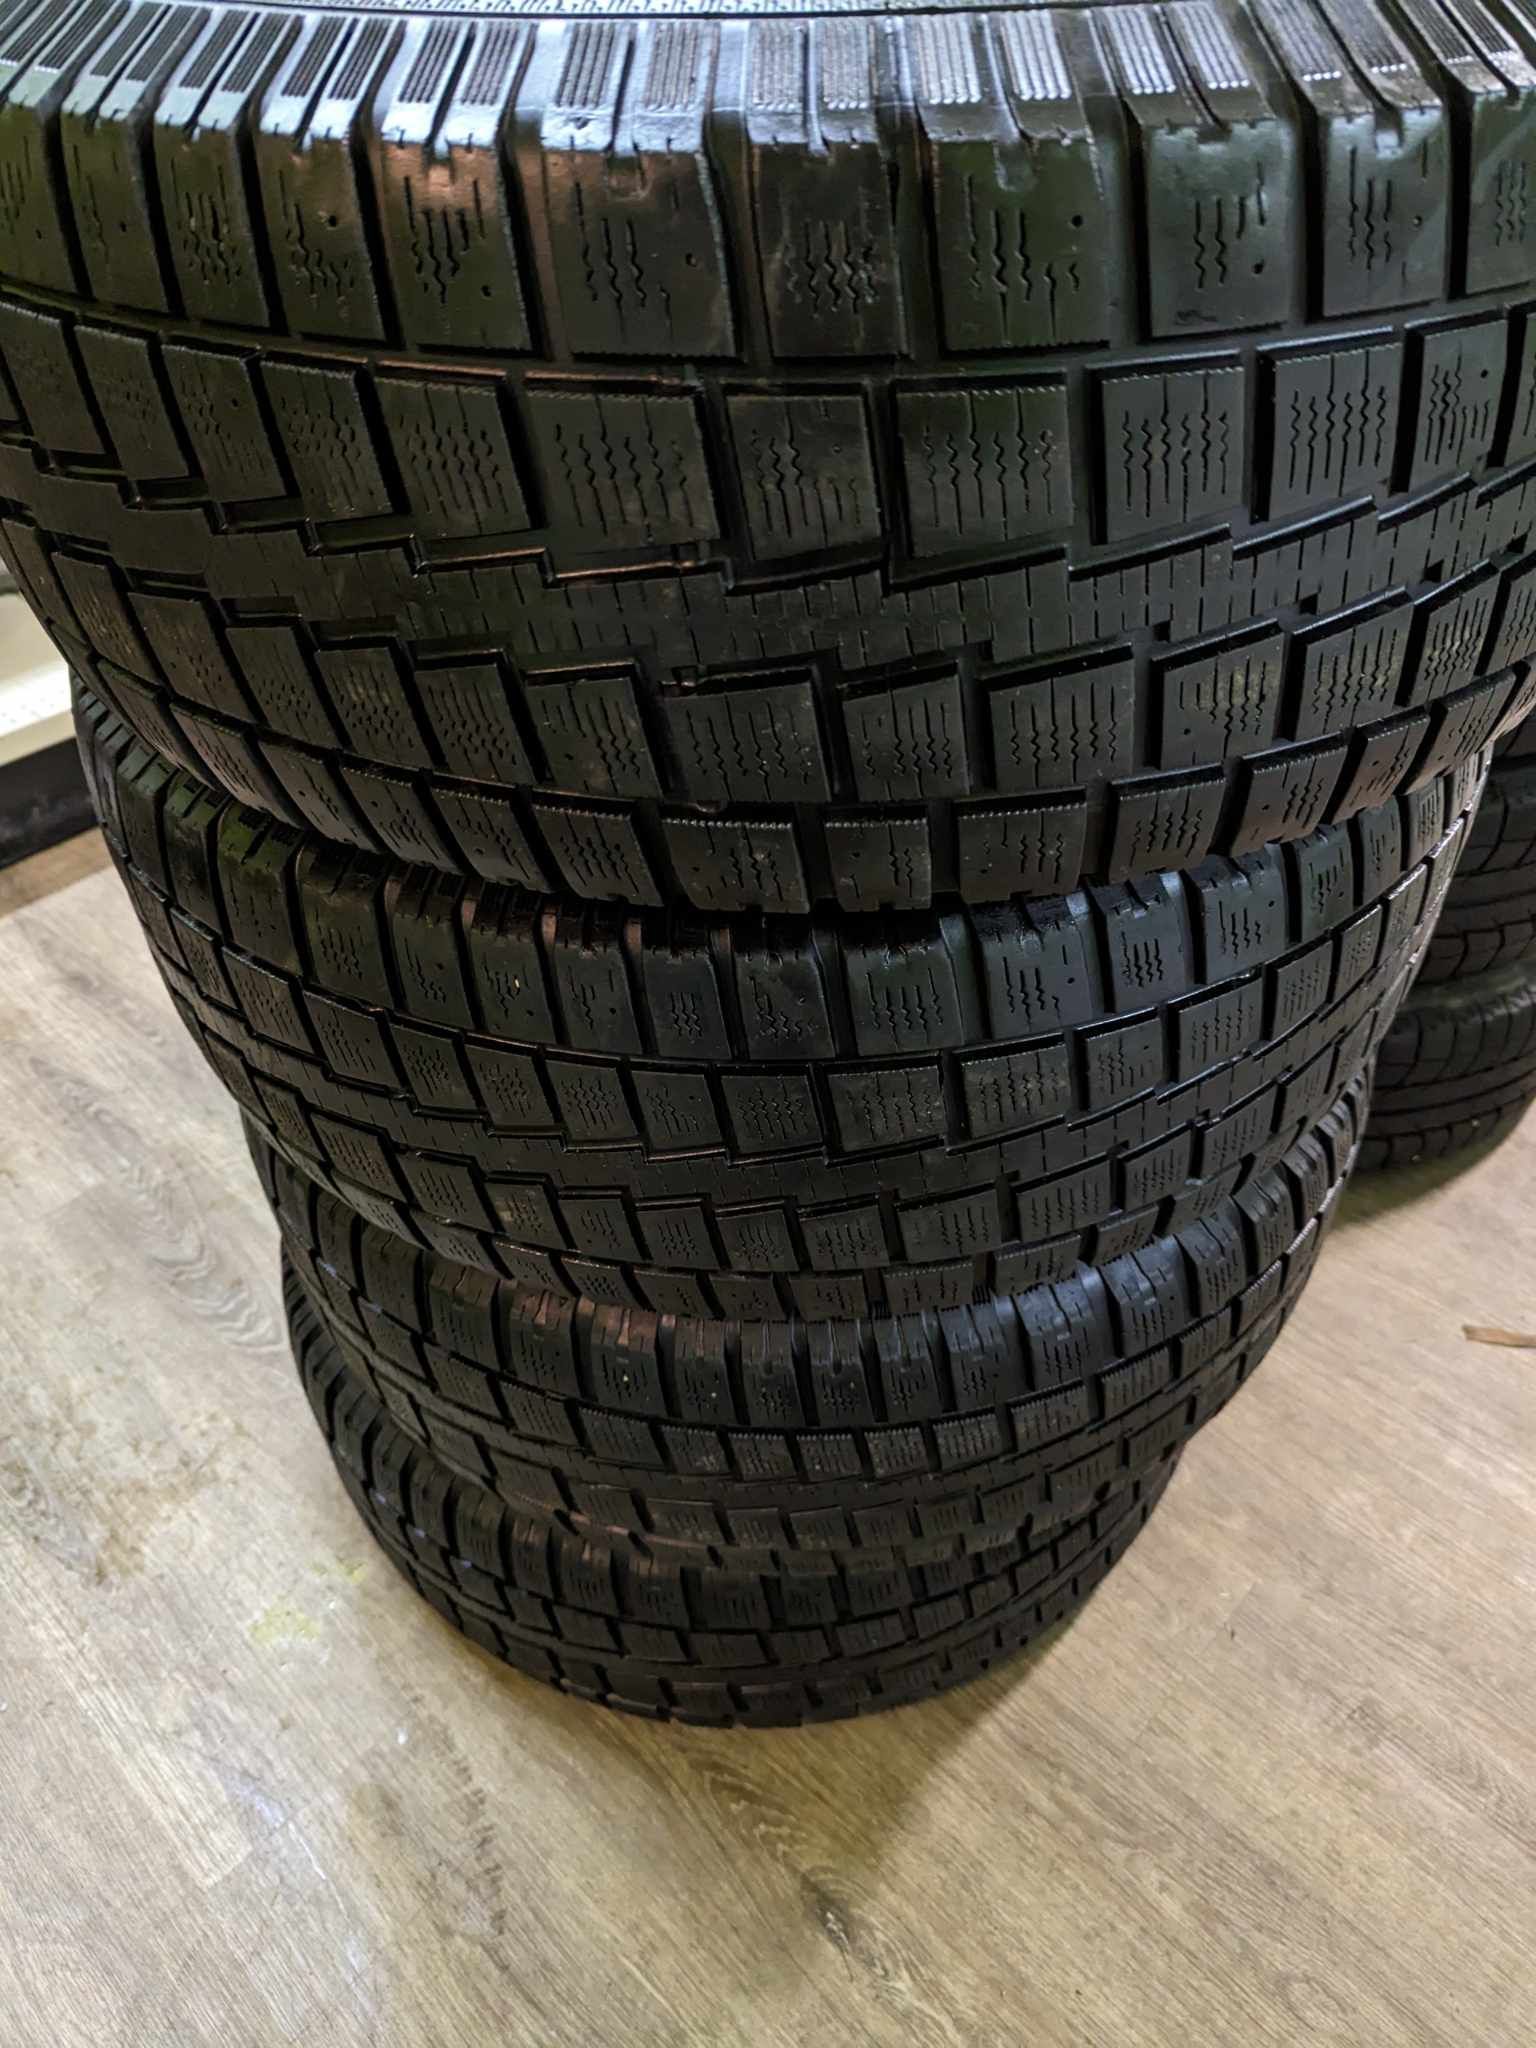 265/70R17 Cooper Snow Tires on Ford F150 Rims